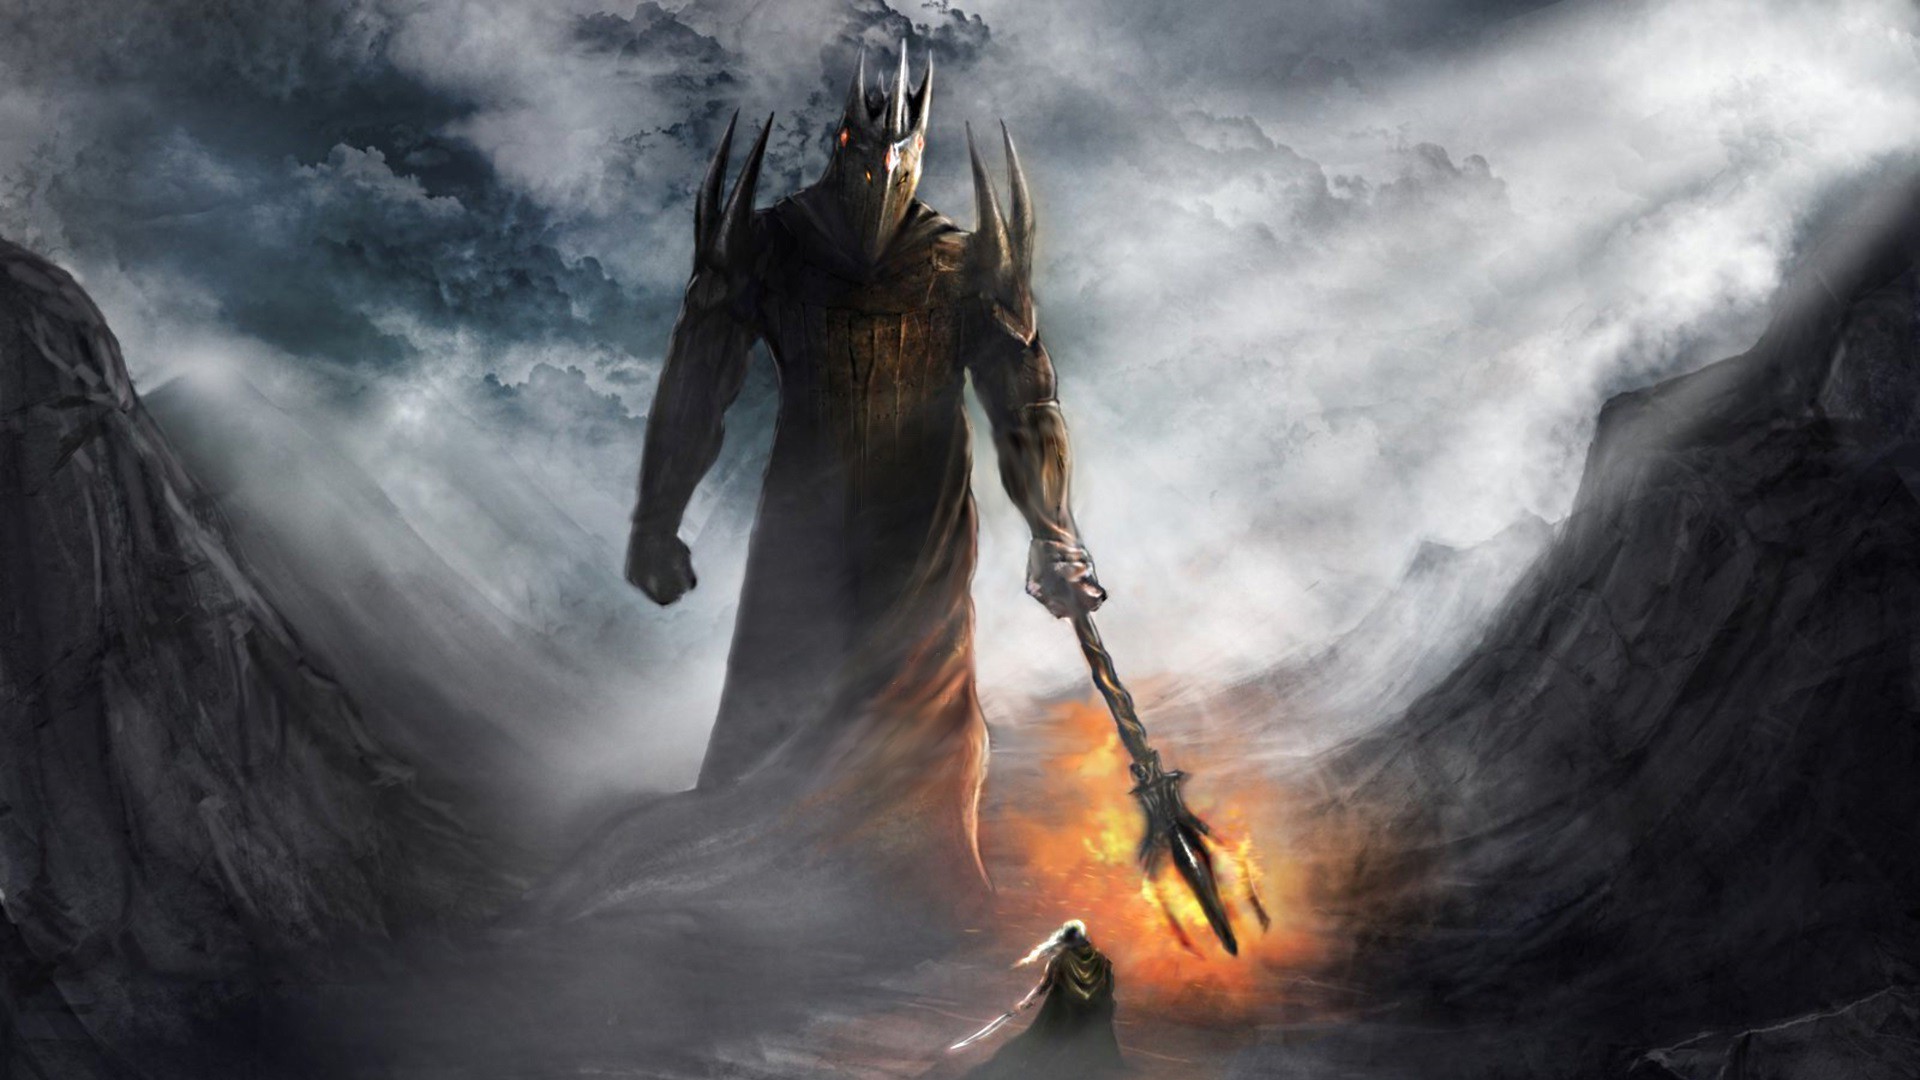 1920x1080 Morgoth Lord Of The Rings Gandalf the lord of the 